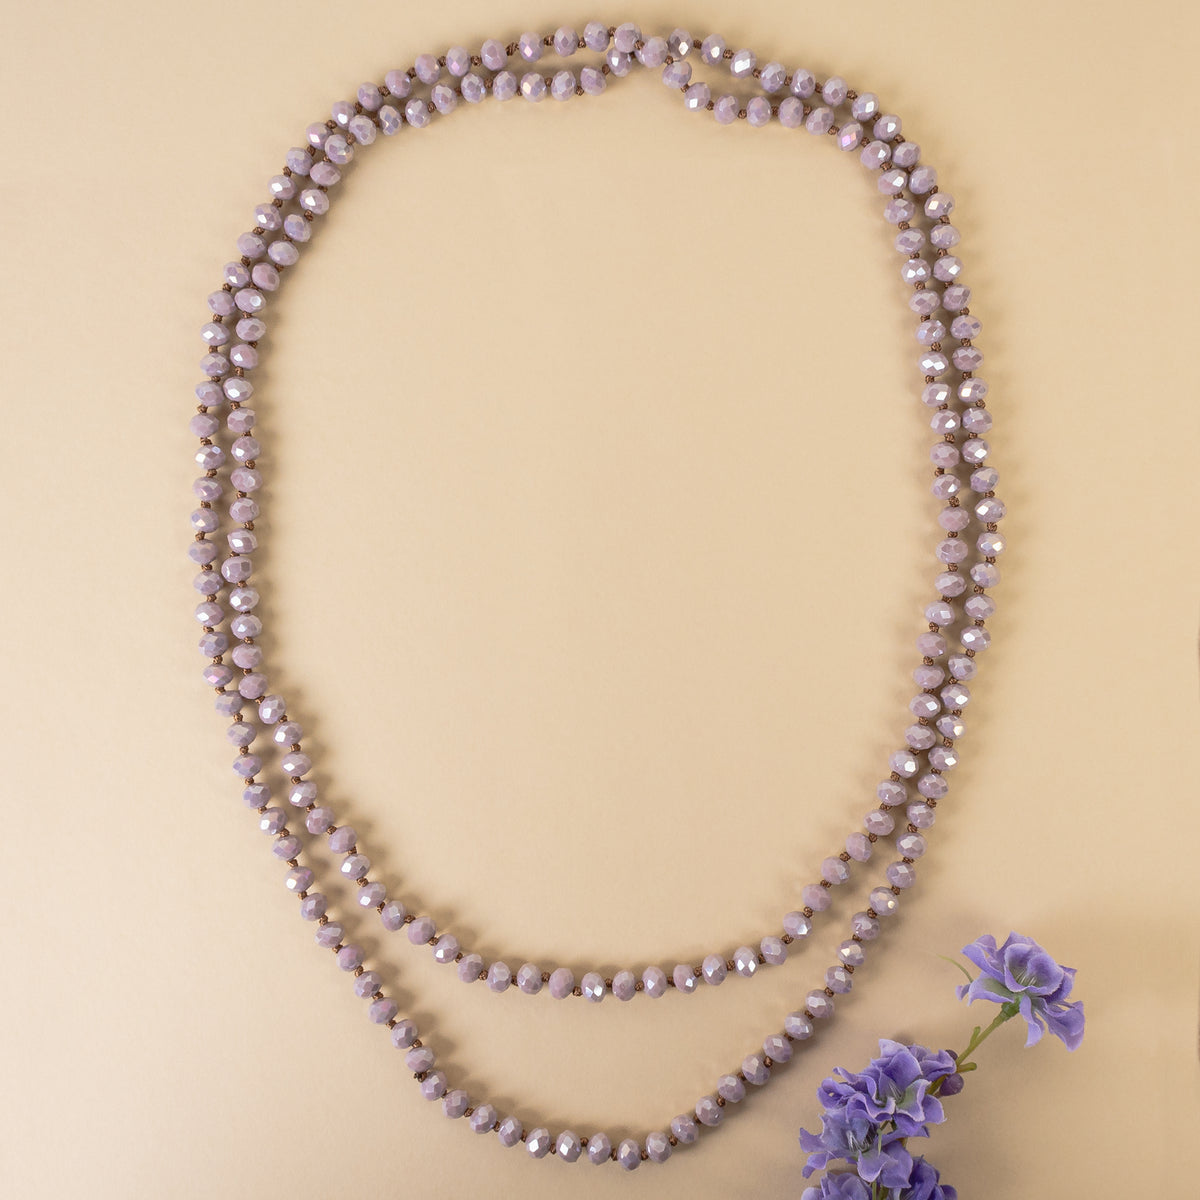 72028-12 - Crystal Beaded Necklace - Purple AB